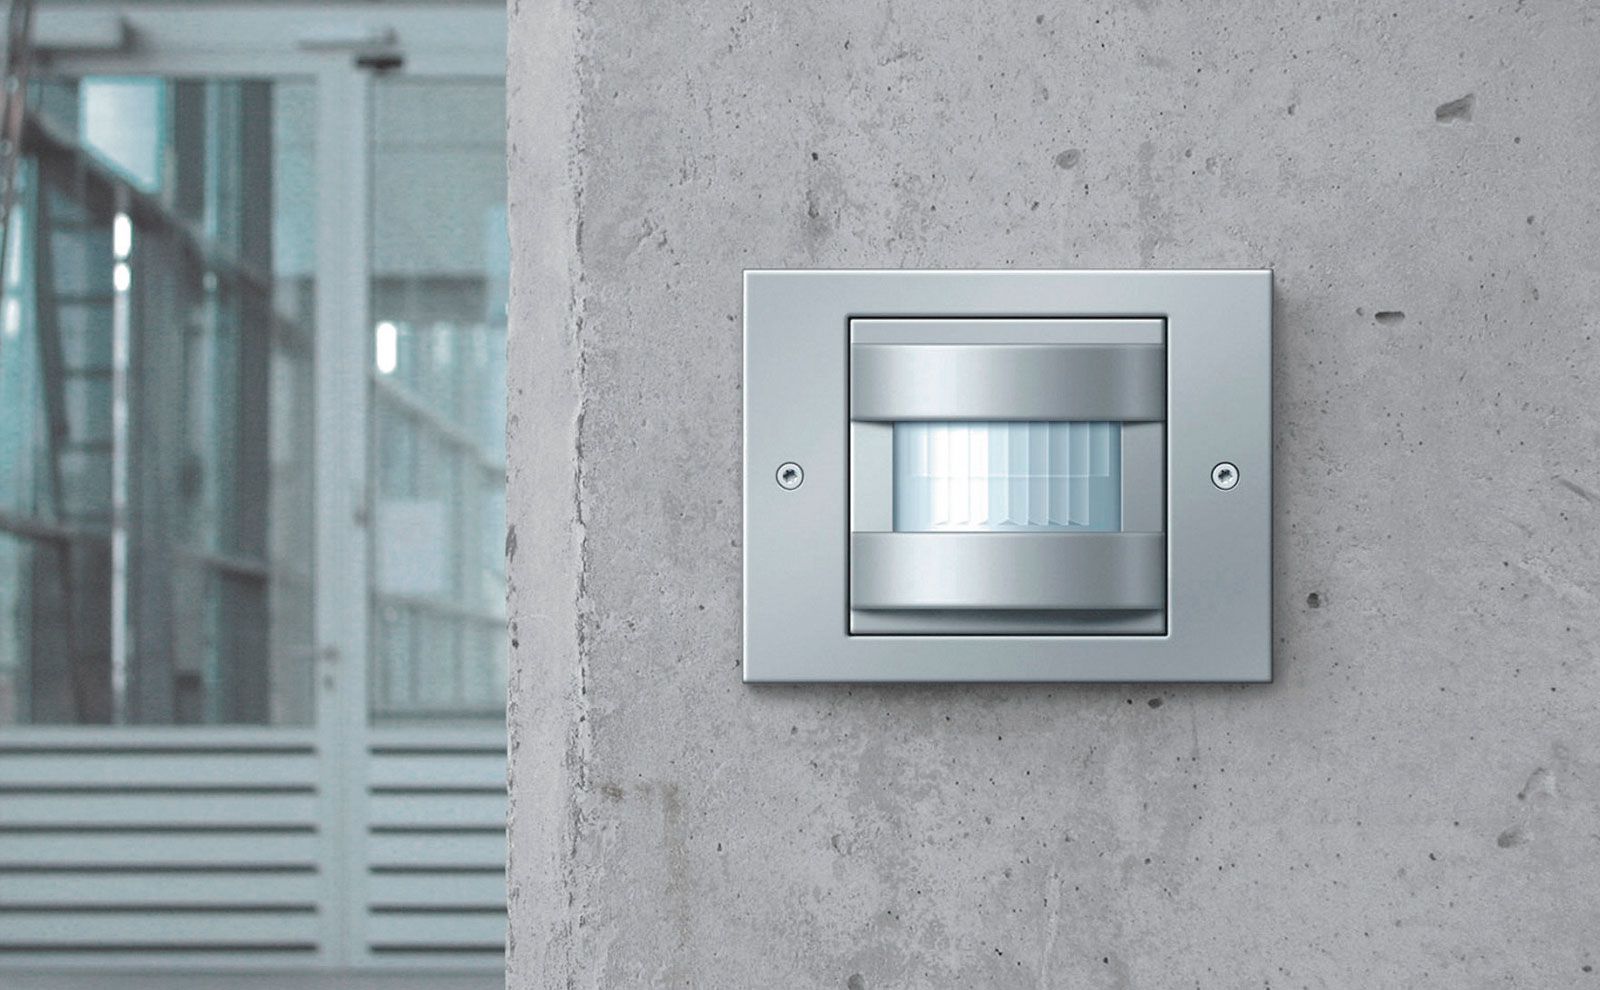 Gira motion detectors observe every corner, even on small properties: automatic lights ✓ coverage angle of 110° ✓ award-winning design.